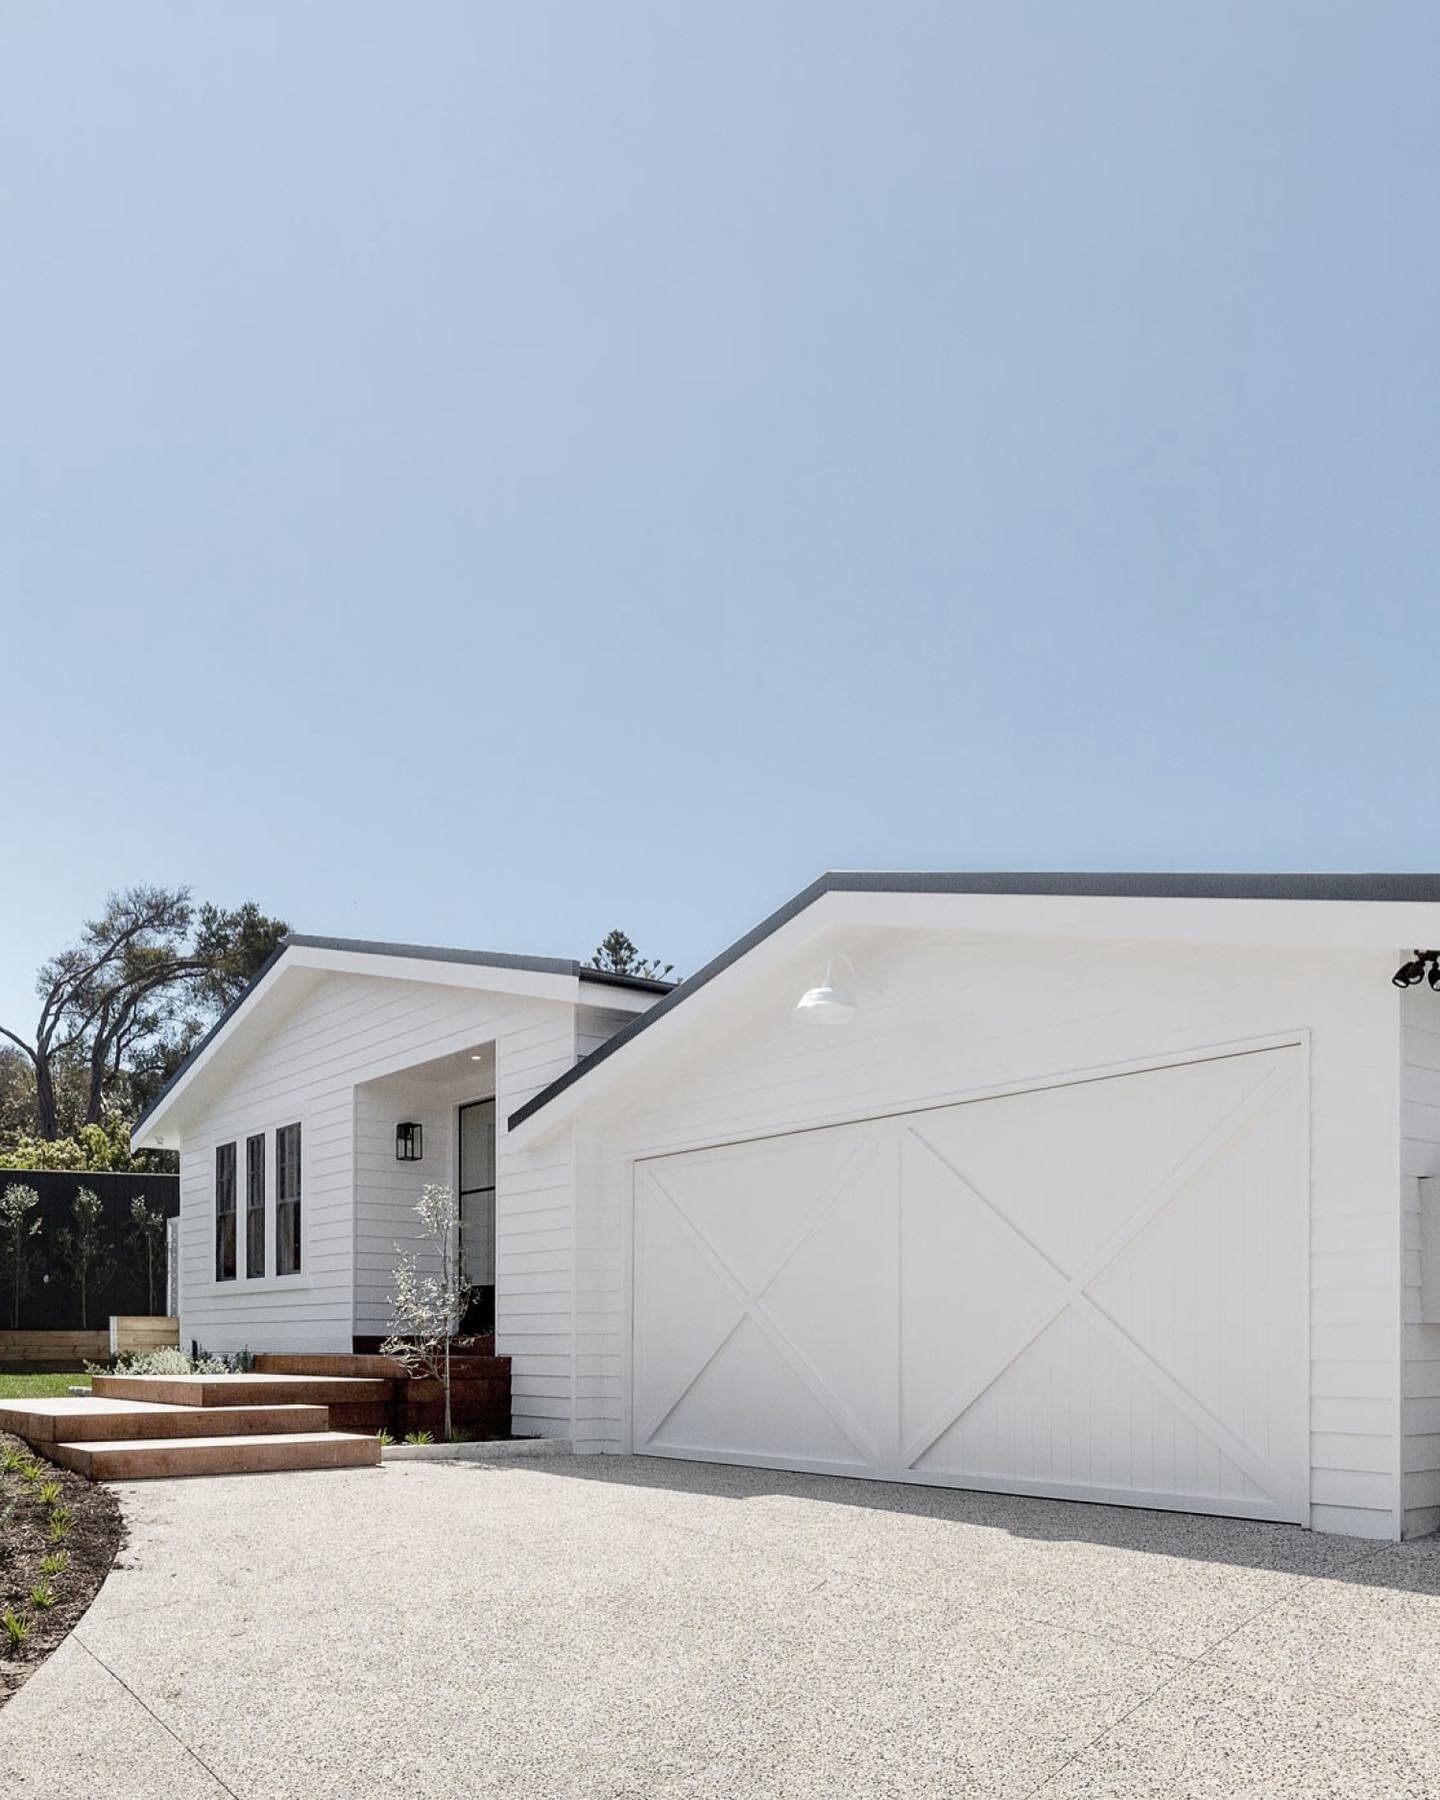 Home time. 

Architecture by us 
Built by @magnusconstruction 

#architecture #melbourne #melbournehomes #beachhouse #beachhousestyle #beachhousedecor #beachhouses #homestyle #homeinspo